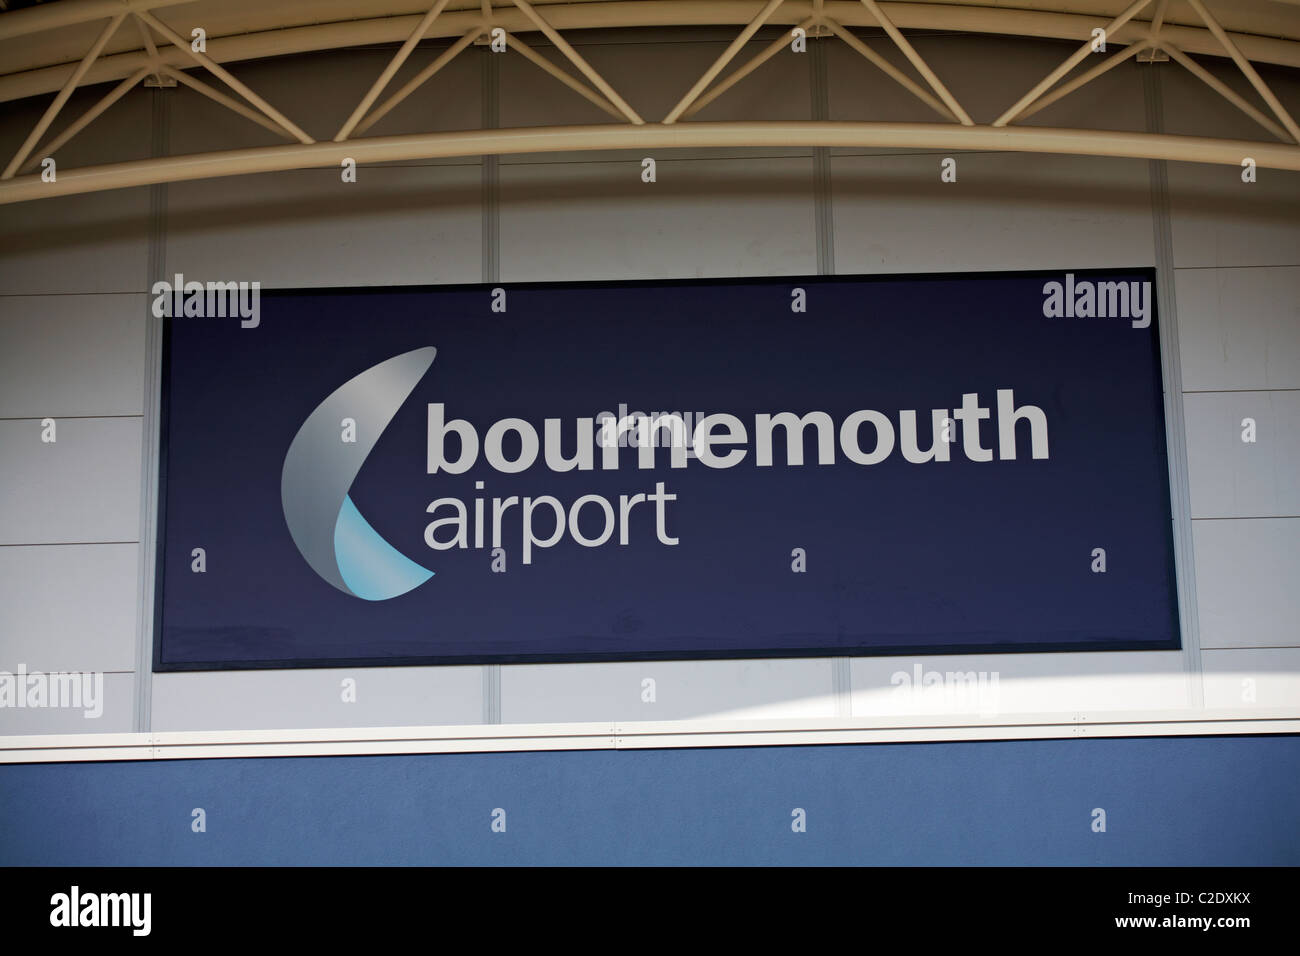 Bournemouth Airport sign on entrance to departures at Bournemouth, Dorset, UK in April Stock Photo